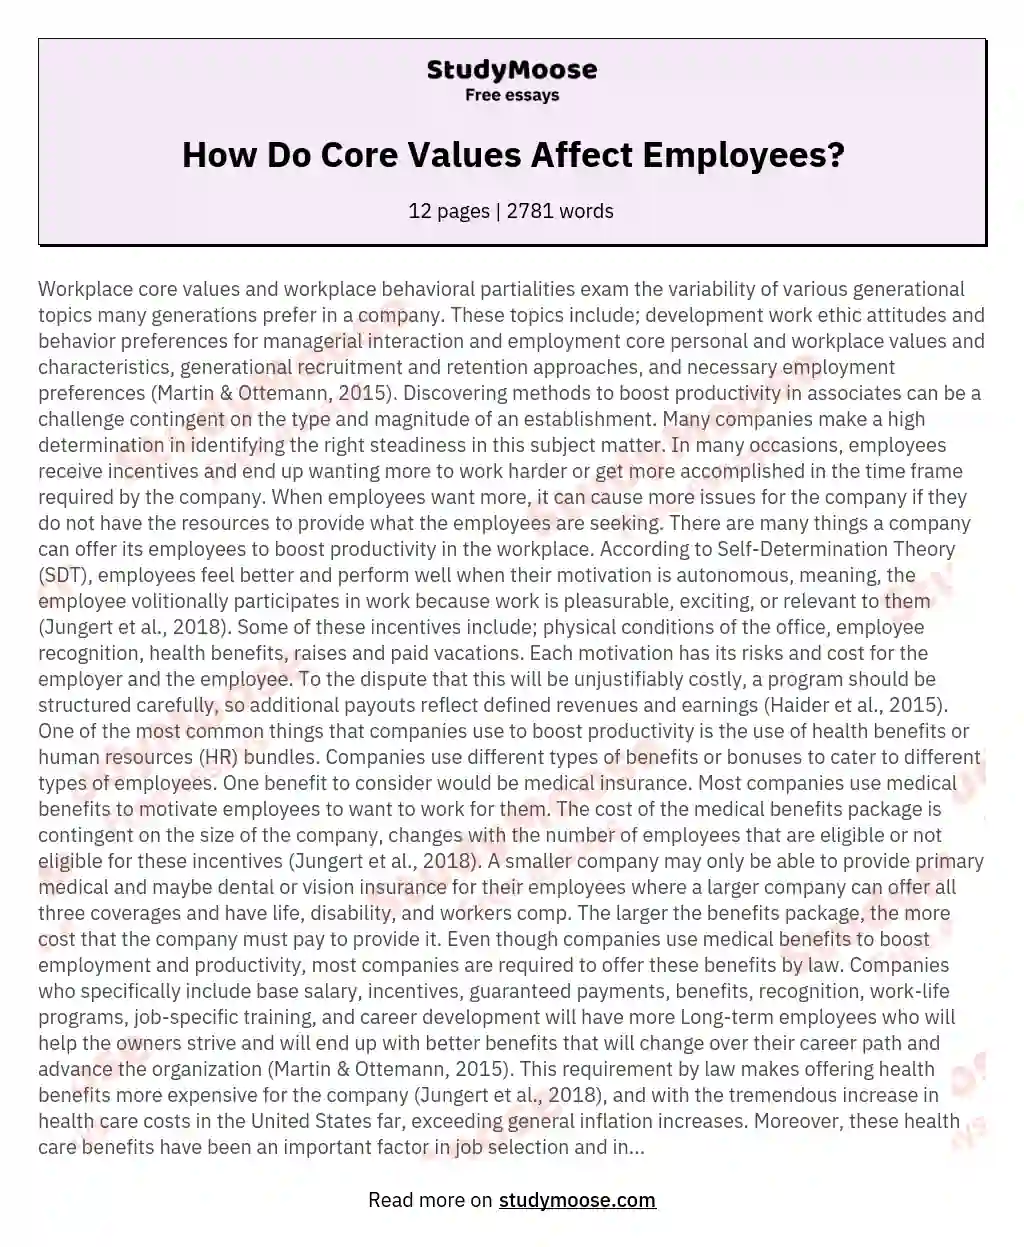 How Do Core Values Affect Employees? essay